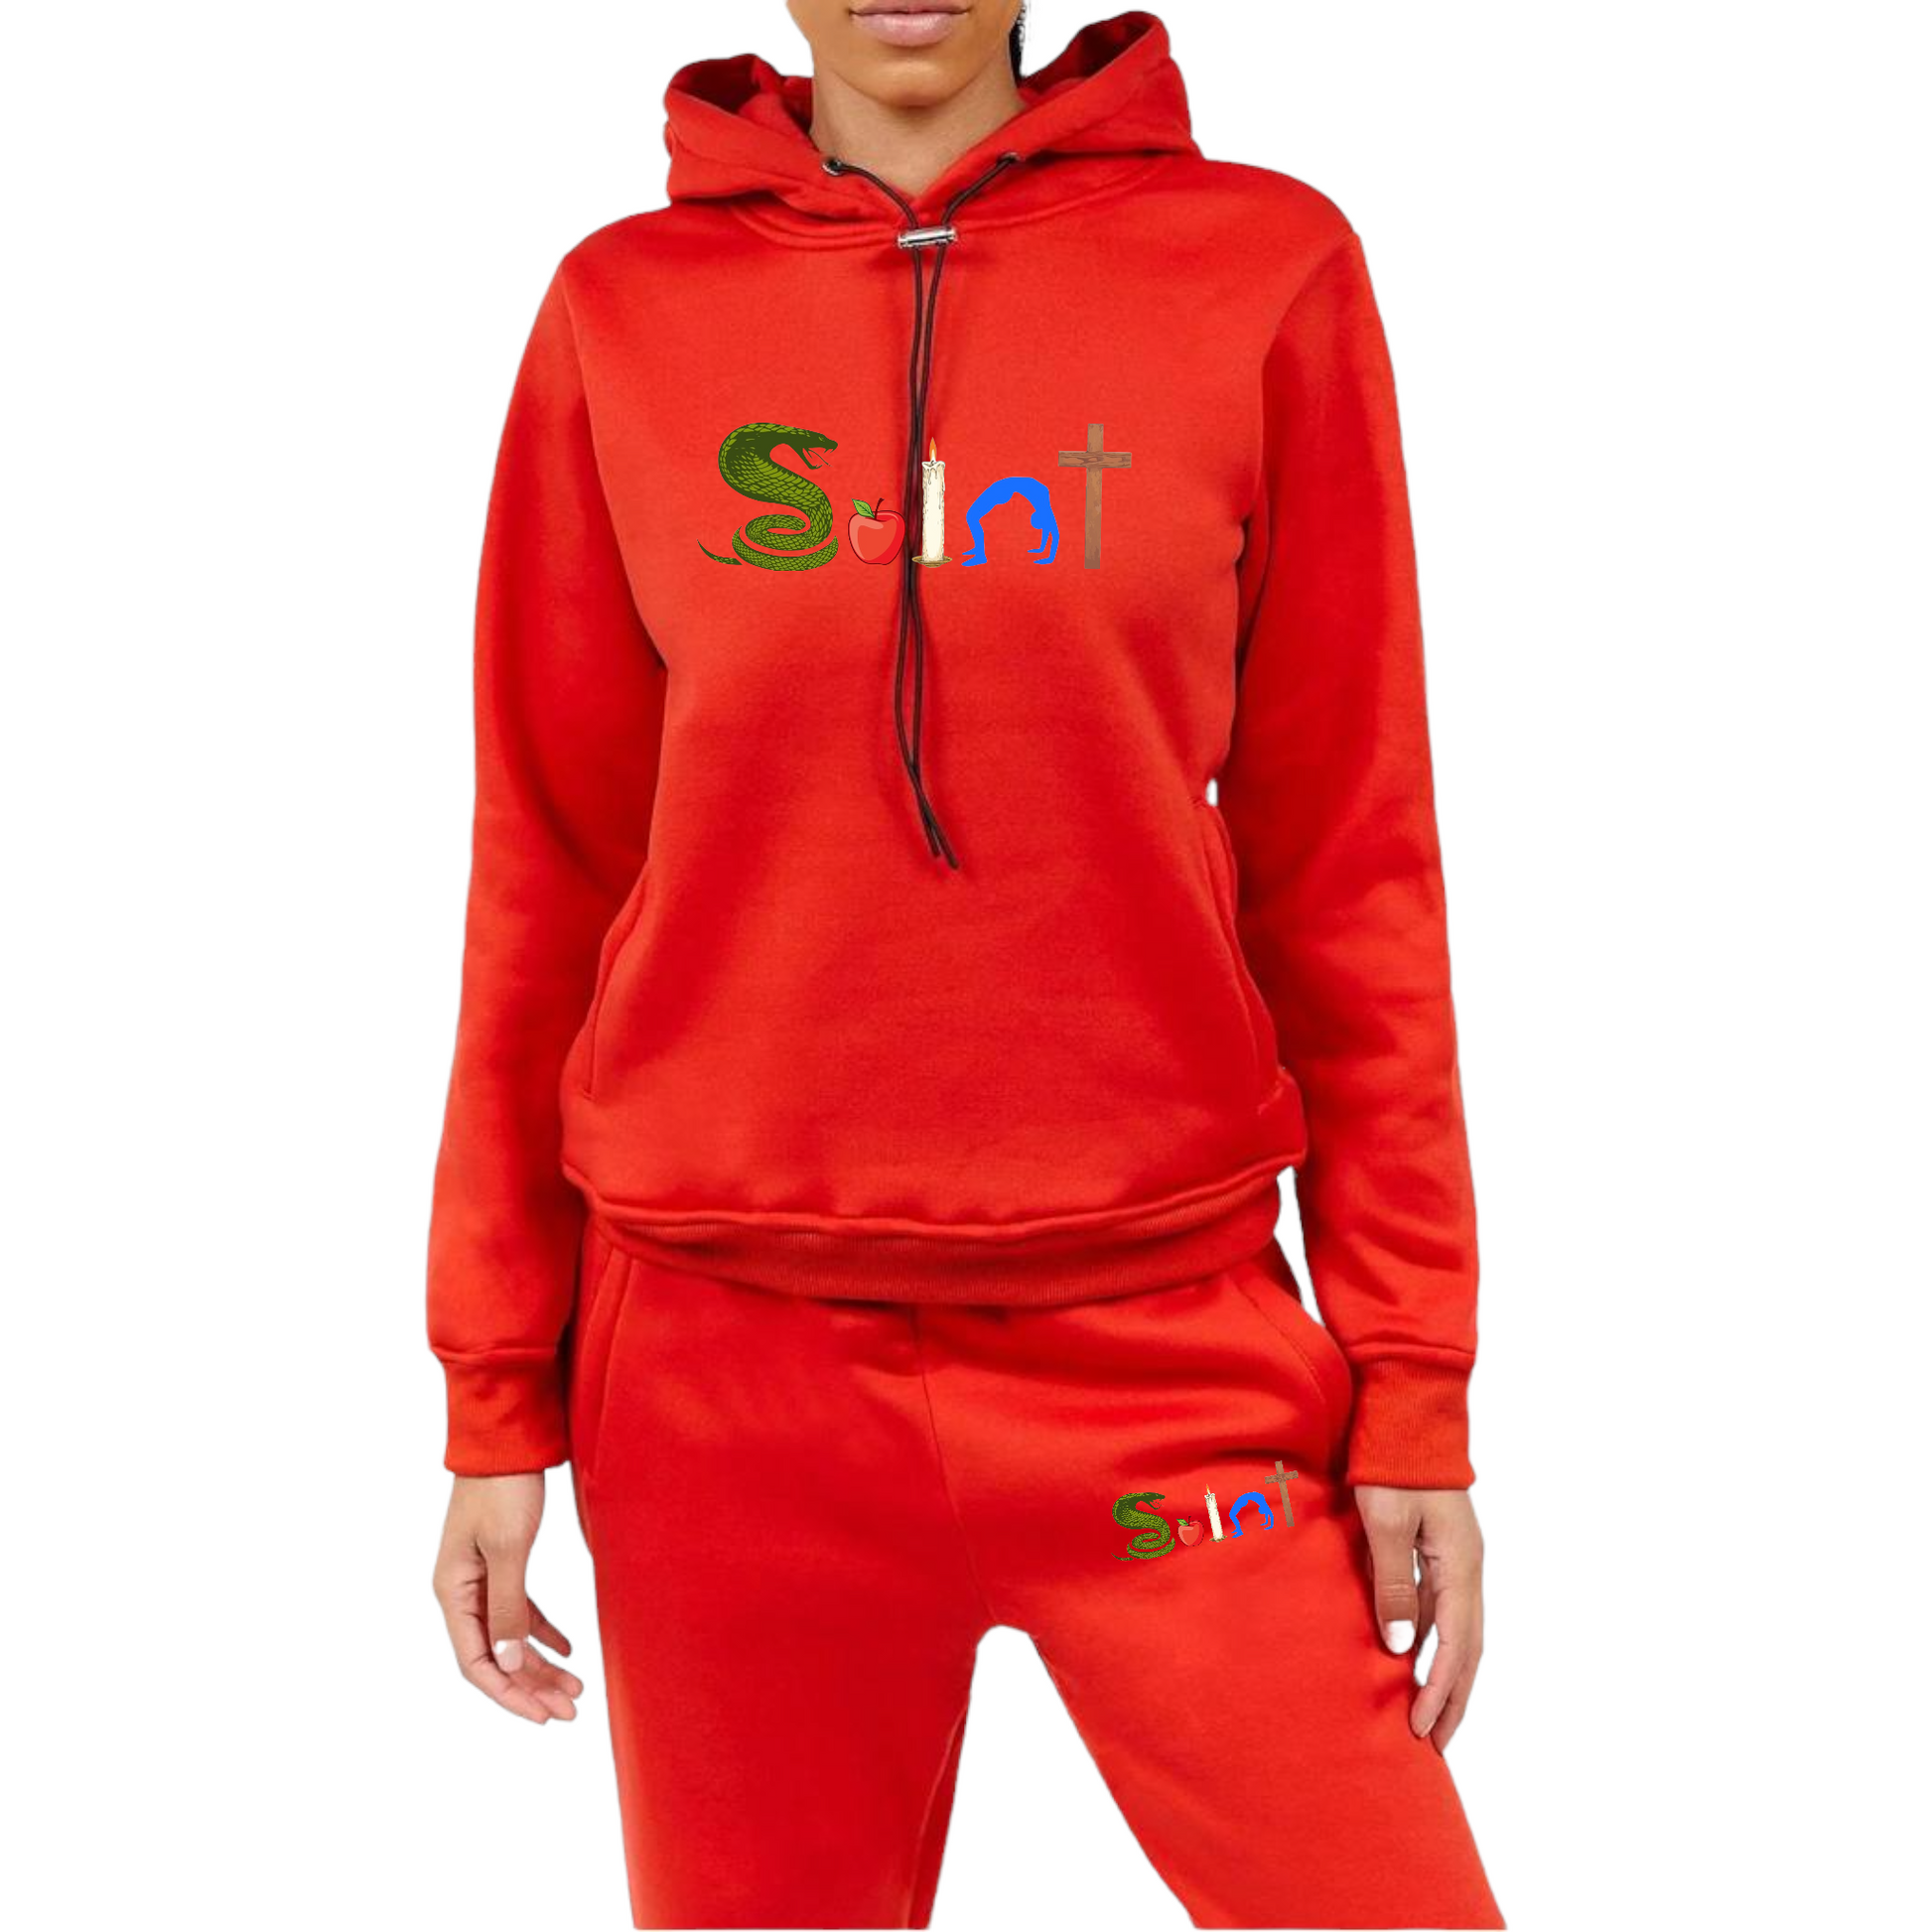 SAINT Matching Sets (Hoodies and Pants) - Red color **Limited Release - TheSinners2Saints